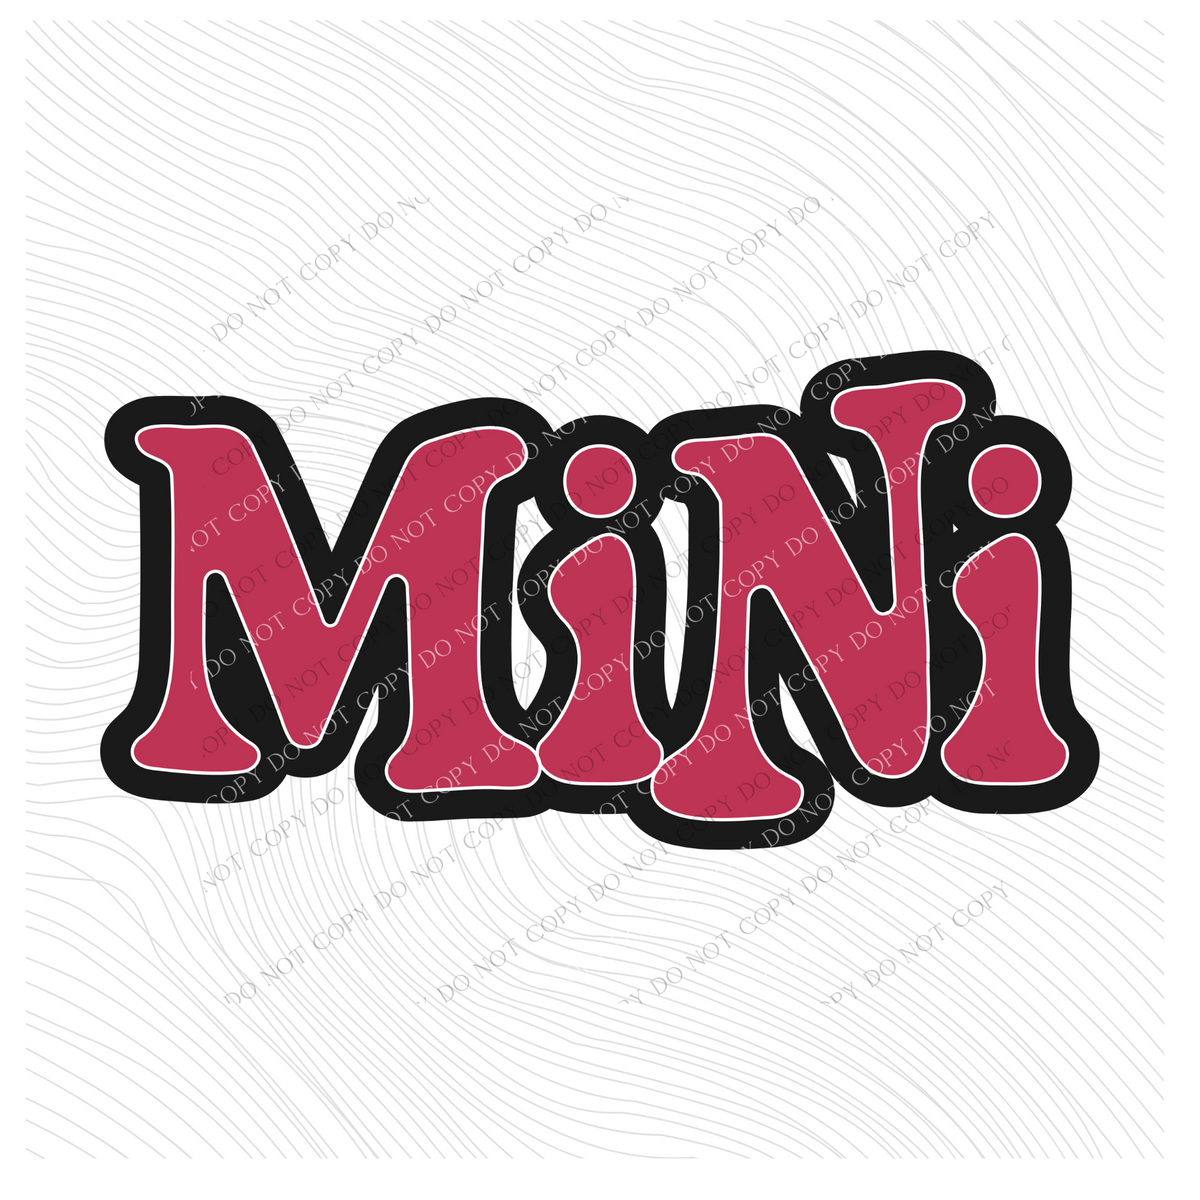 Mini Vintage Shadow Outline Digital Design in Magenta Pink and Black with White outline, BOTH PNG & SVG Included!